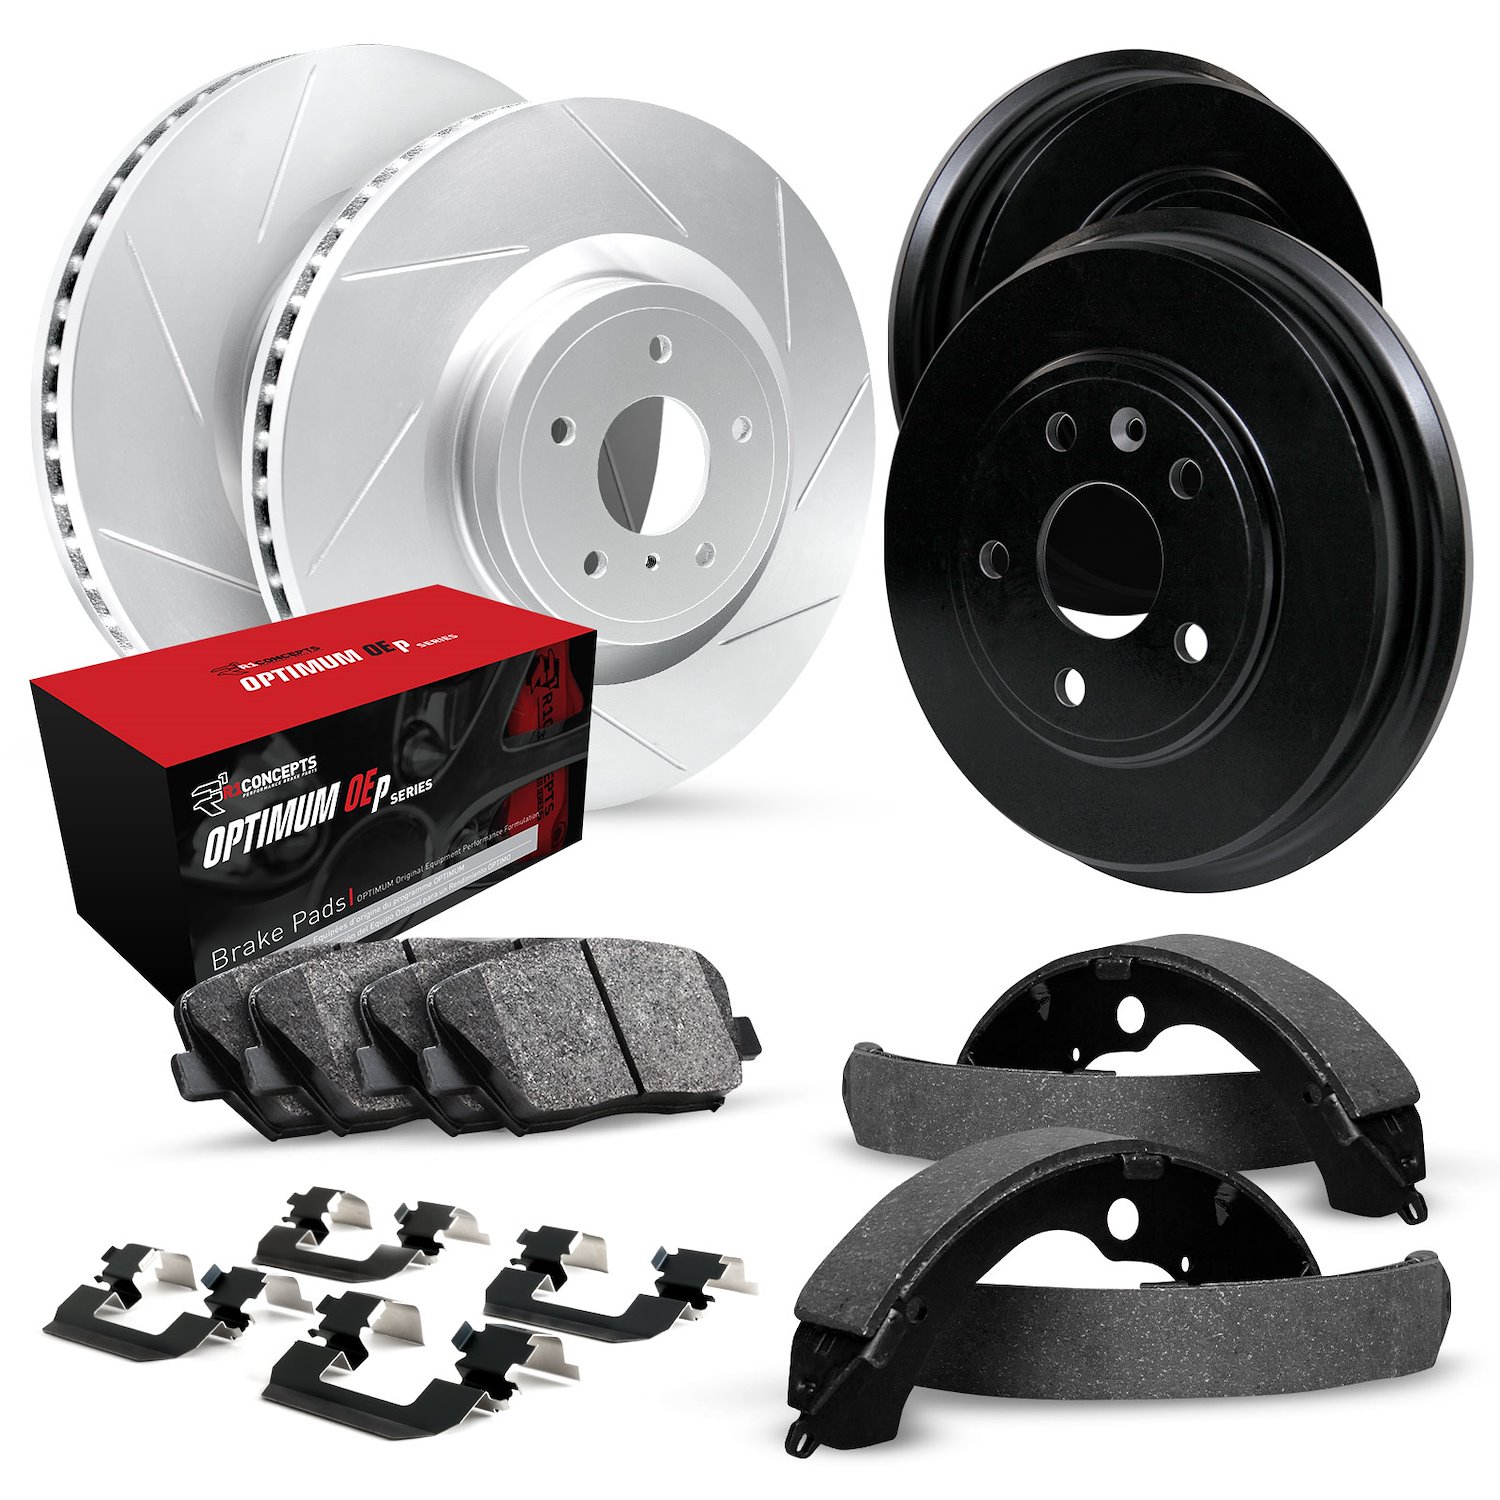 GEO-Carbon Slotted Brake Rotor & Drum Set w/Optimum OE Pads, Shoes, & Hardware, 1991-1992 Ford/Lincoln/Mercury/Mazda